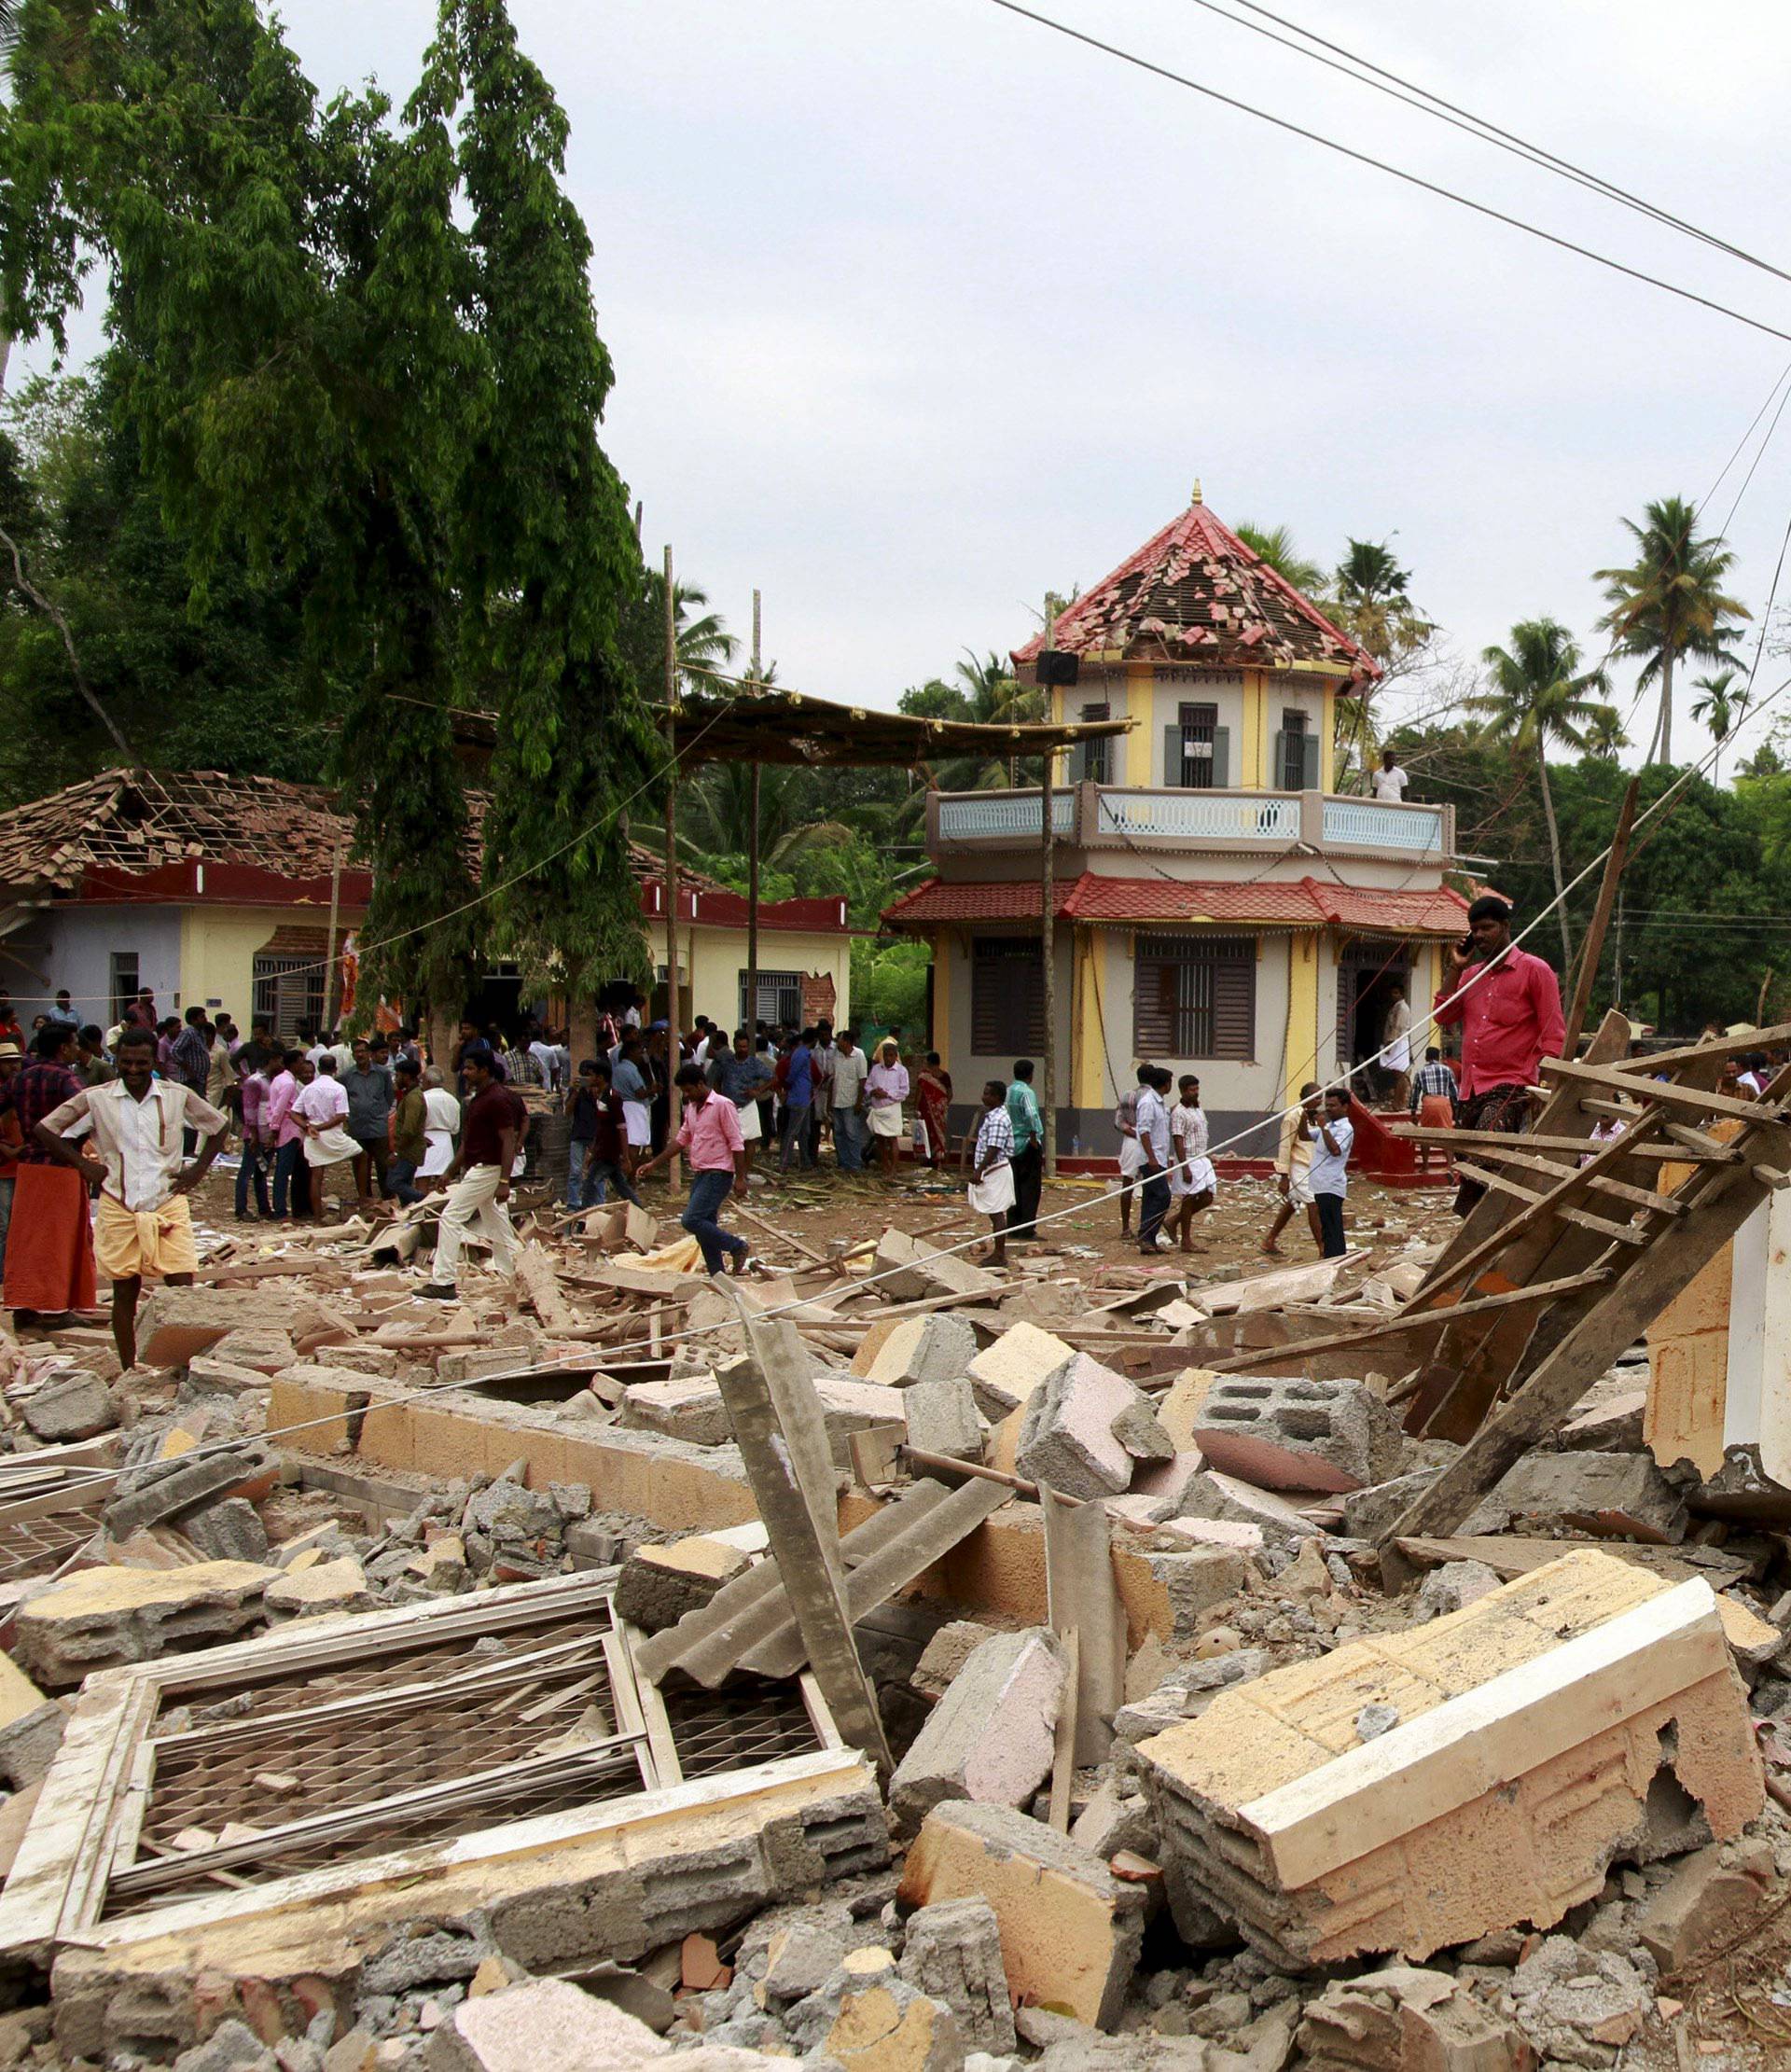 People walk past debris after a fire broke out at a temple in Kollam in the southern state of Kerala